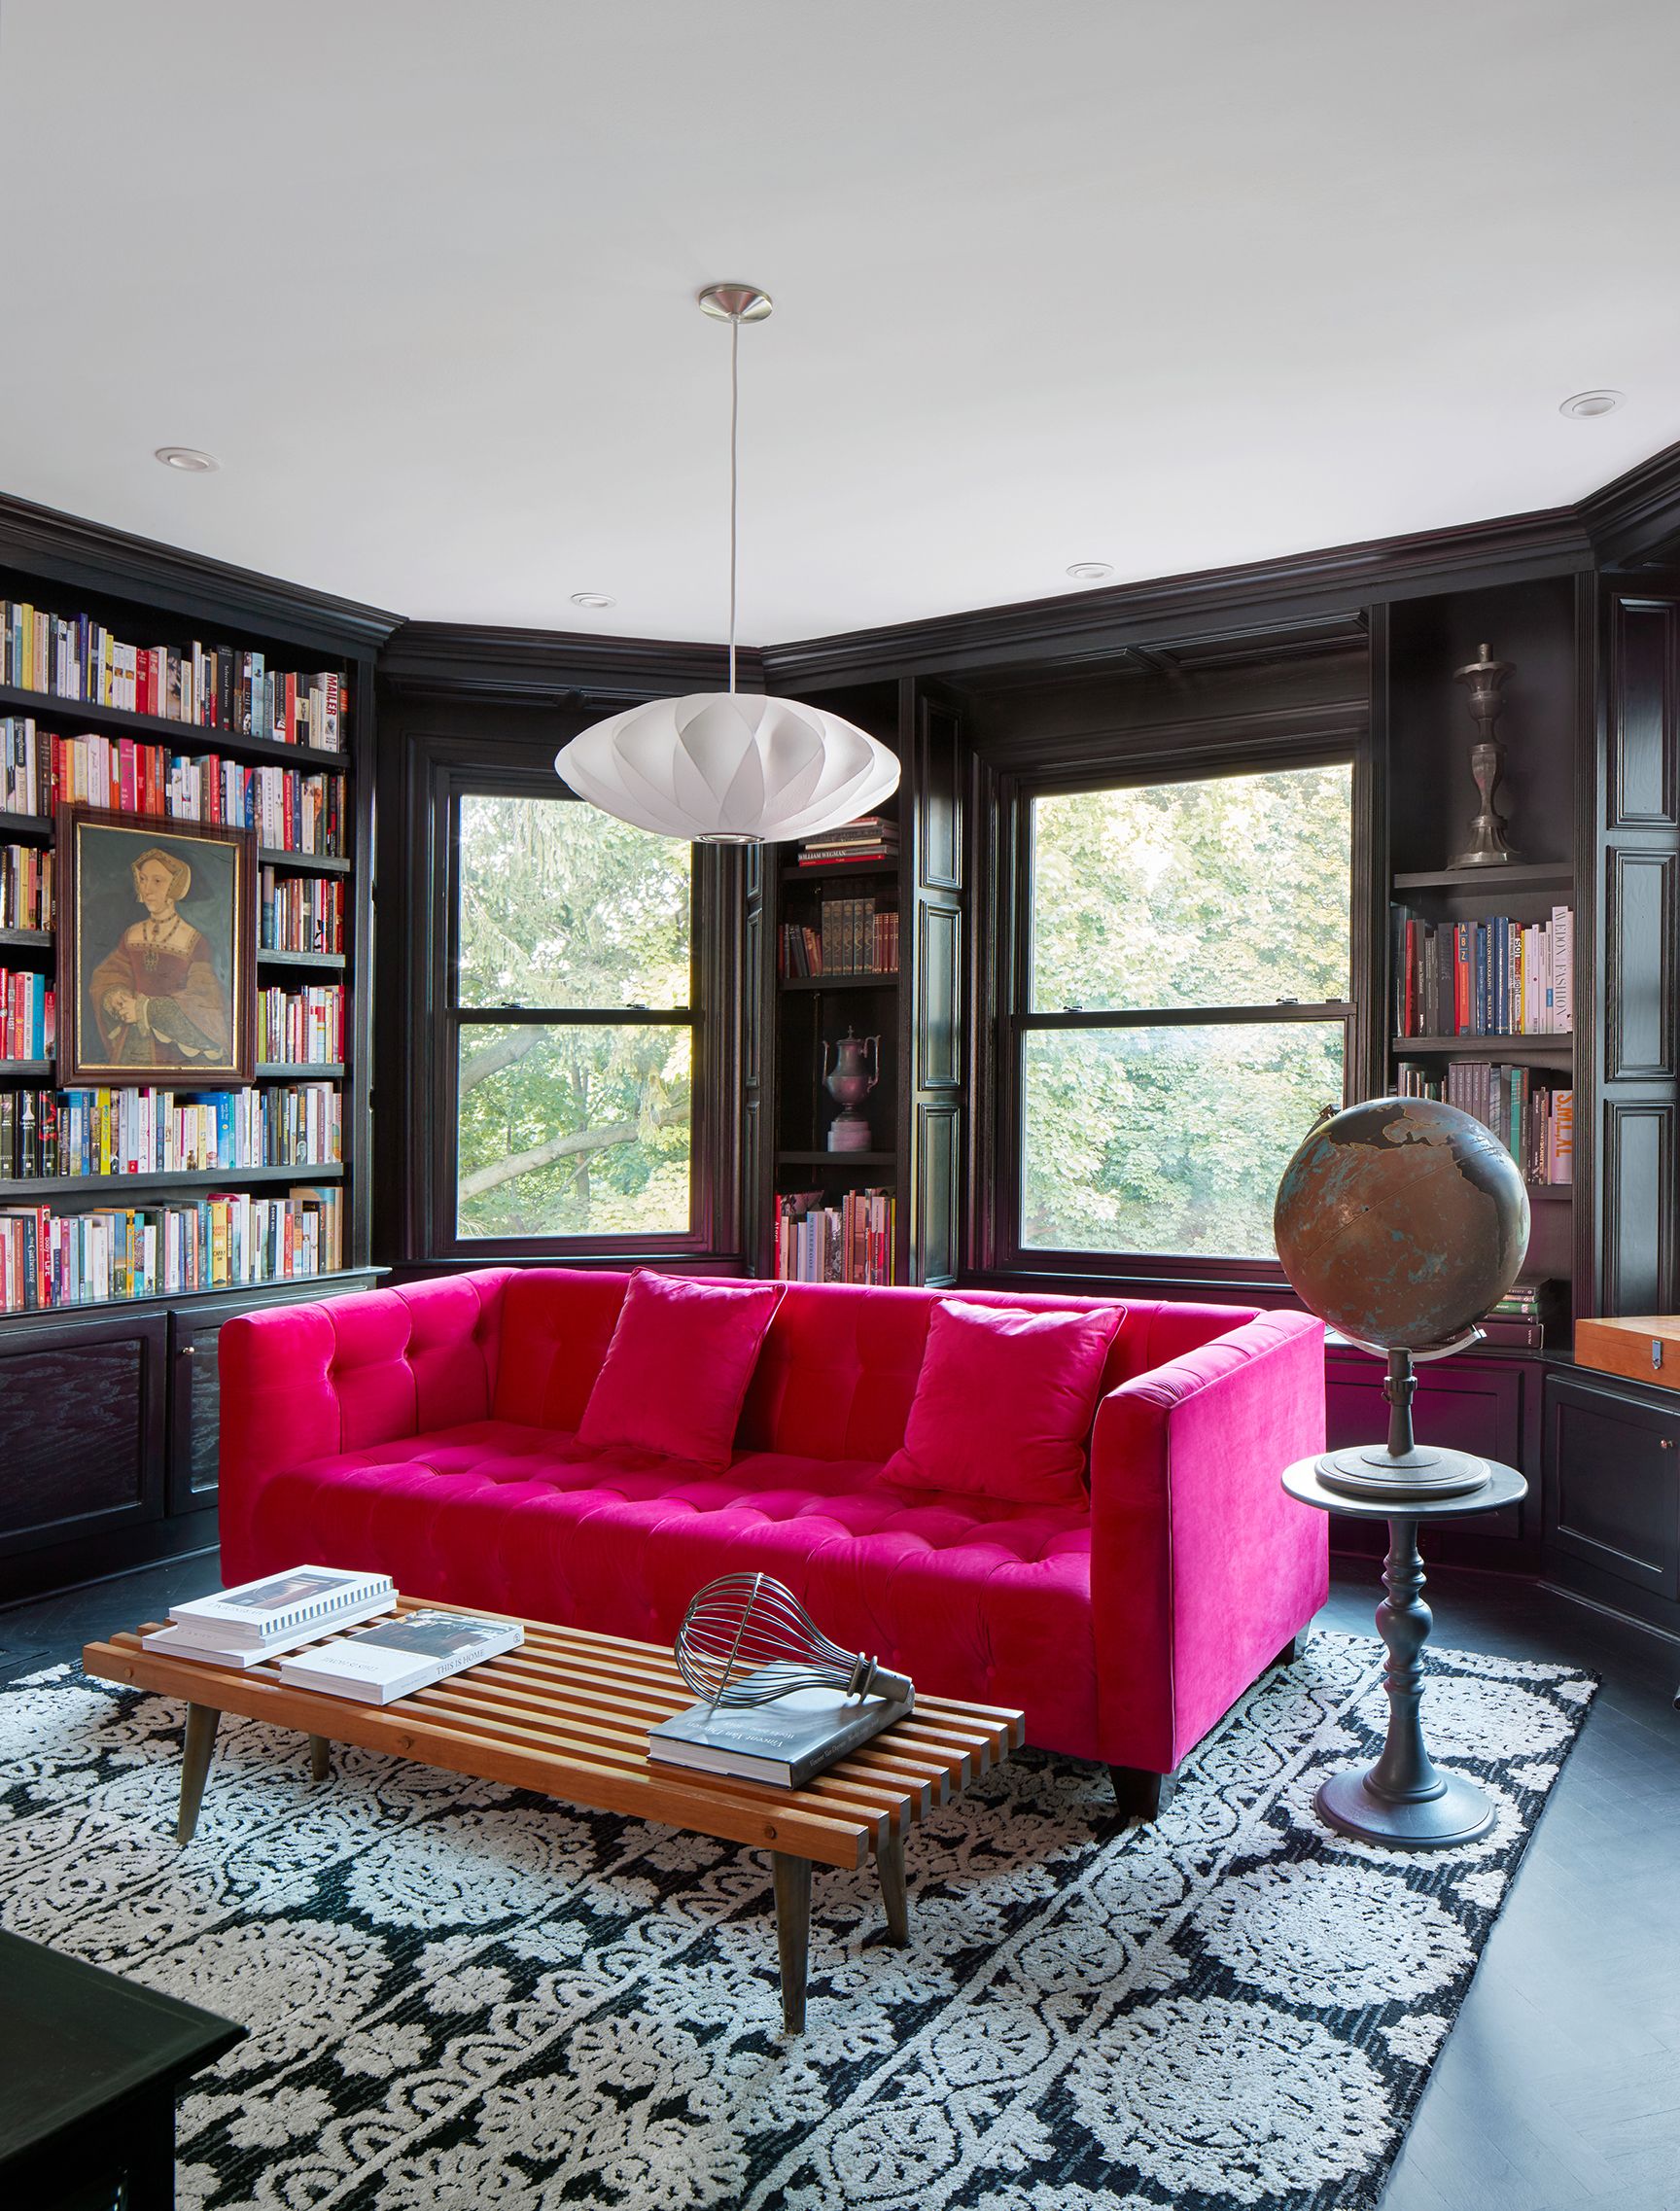 Coffee Table Books Round Up - The Pink Dream